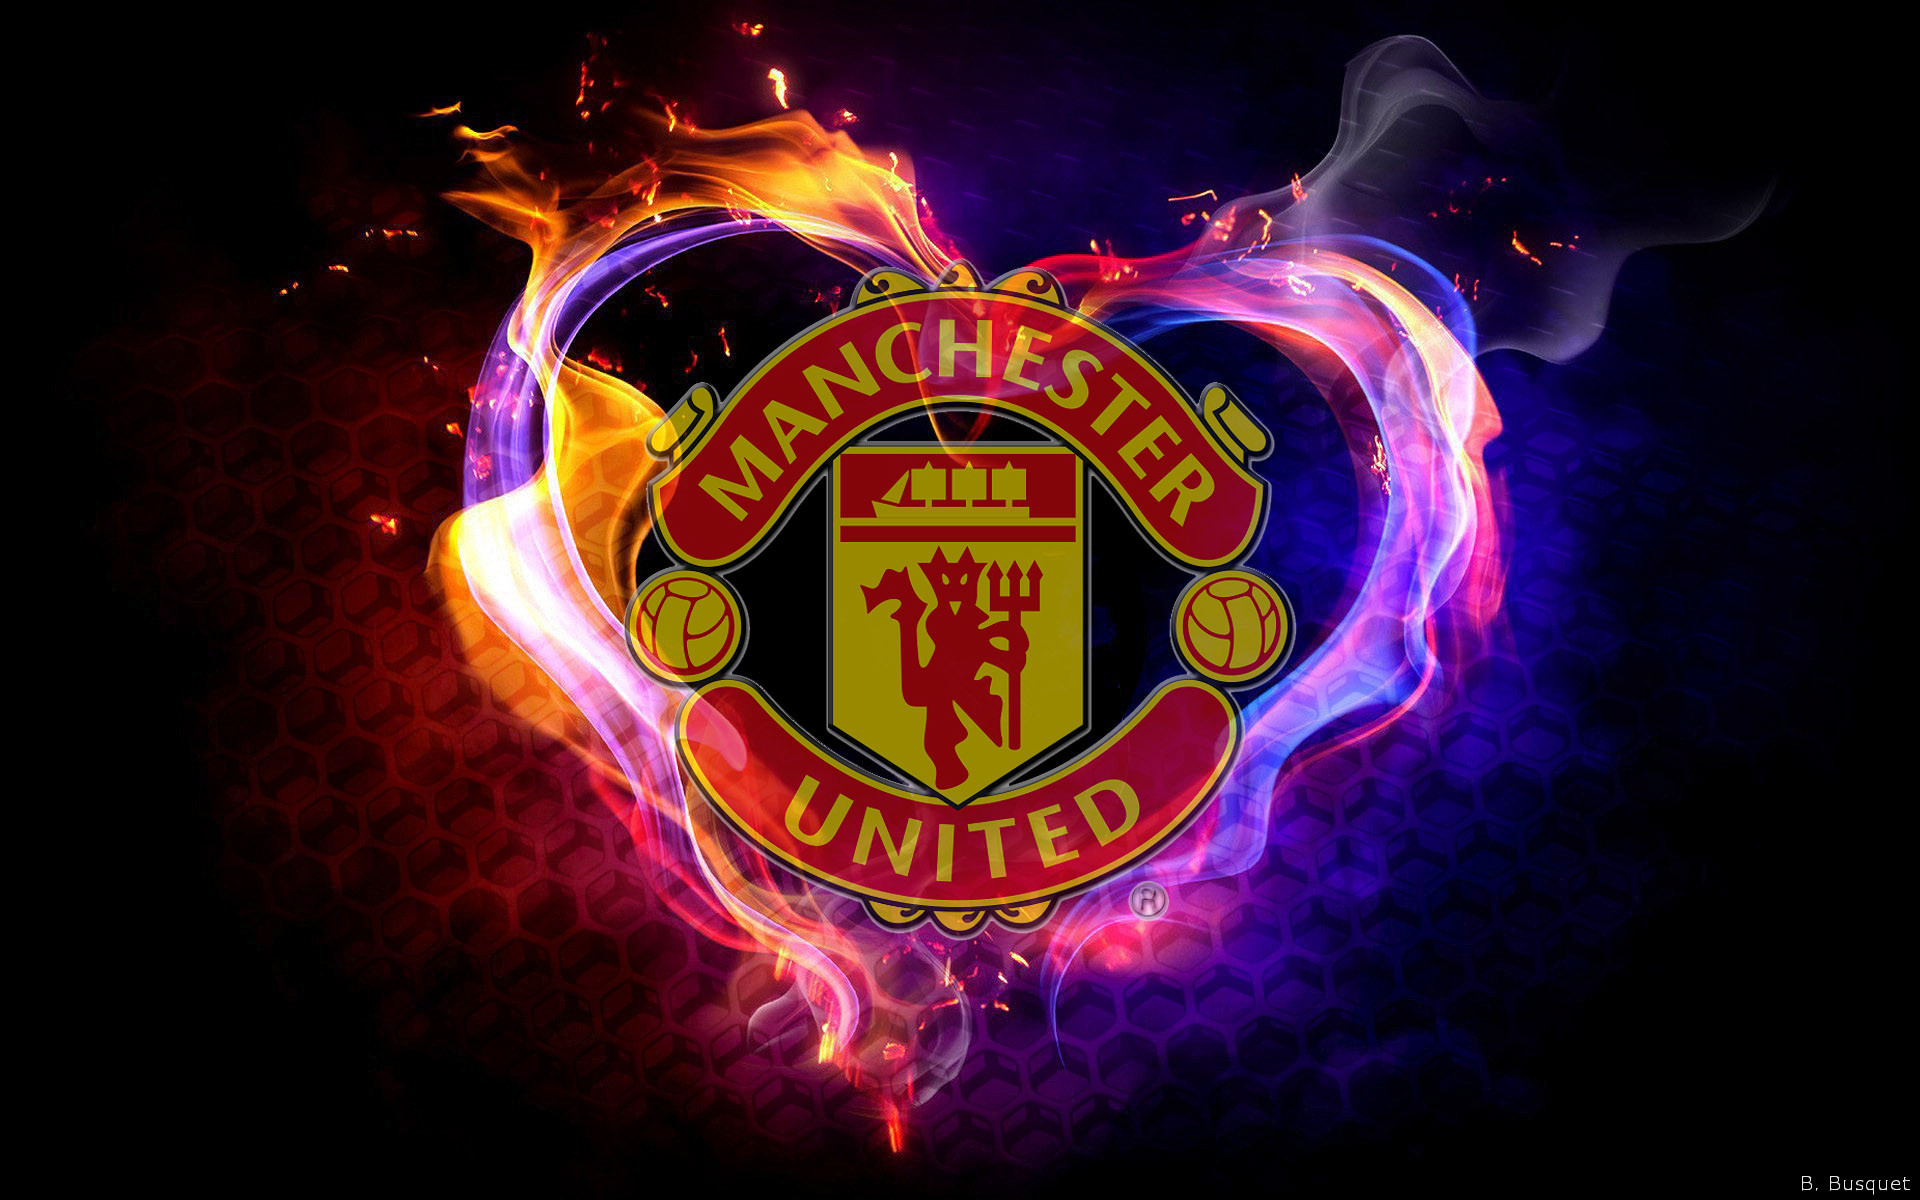 Manchester United Wallpaper With Flames Manchester United Logo 19 19x10 Wallpaper Teahub Io